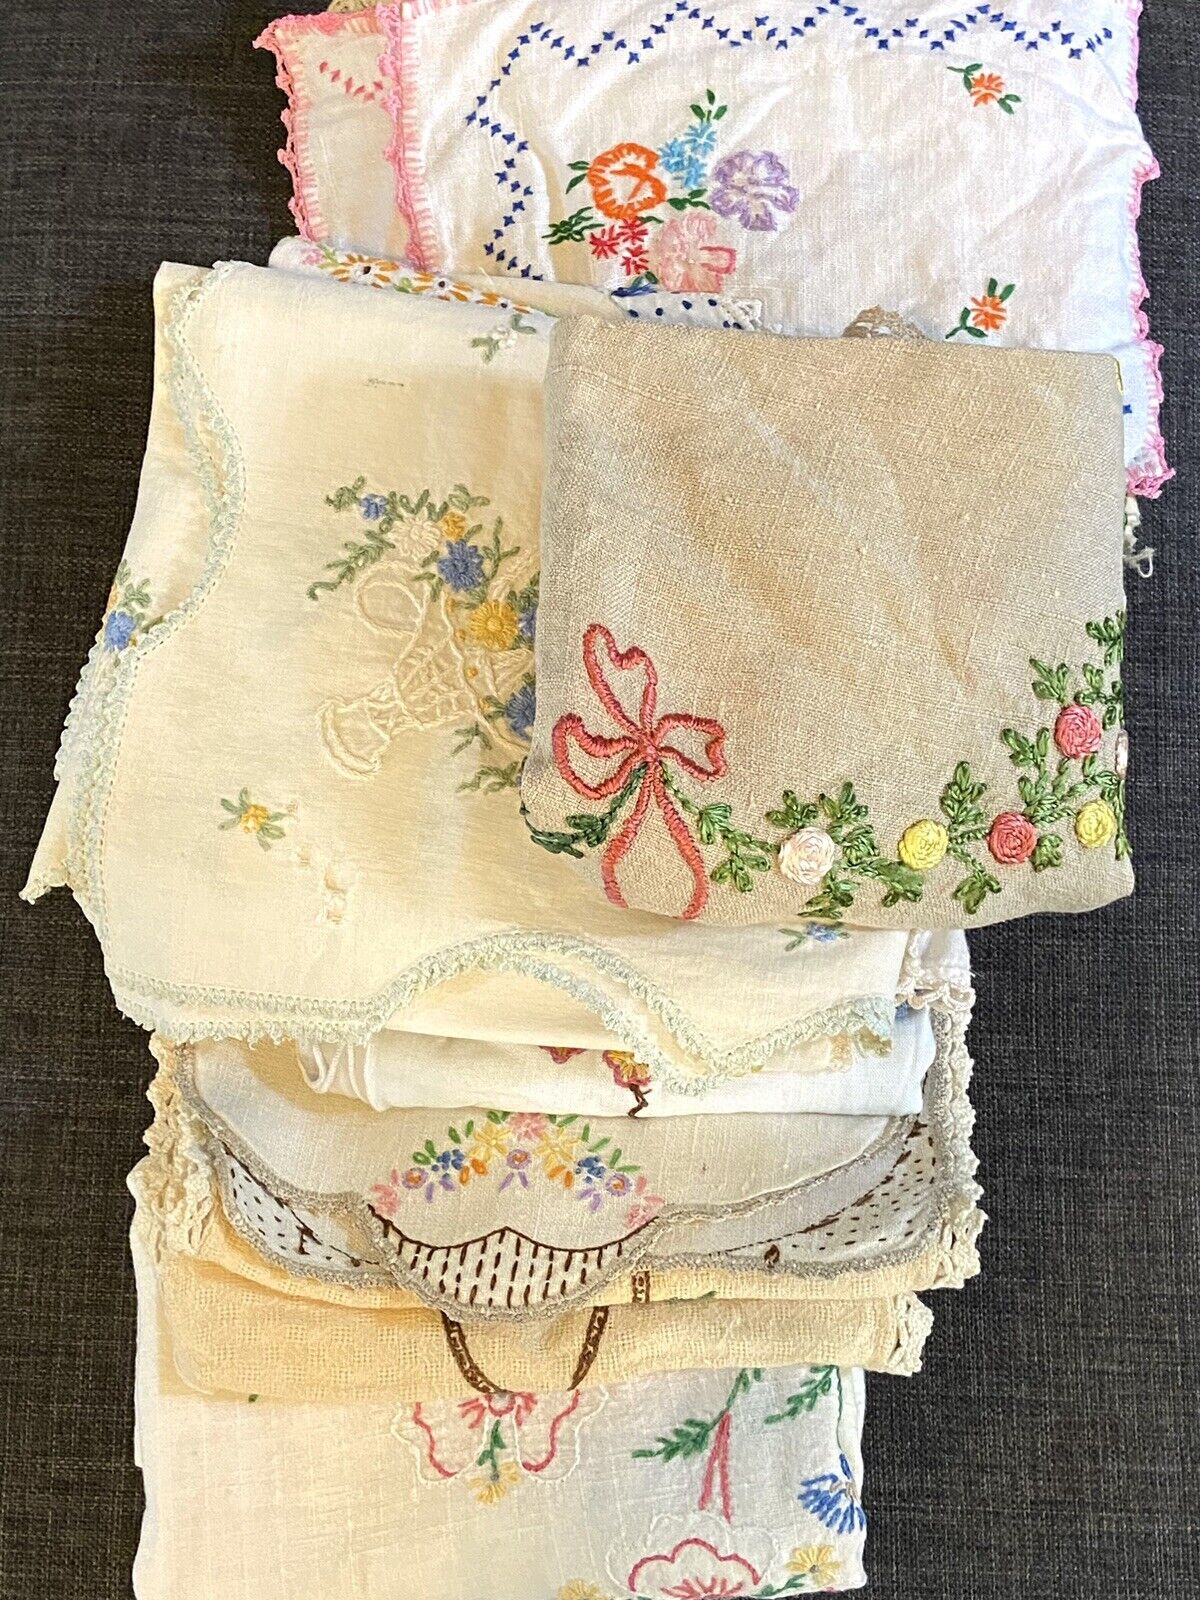 VTG CUTTER Lot of 25 Embroidered Linens Table Cloth Runner Pillow Place Mats